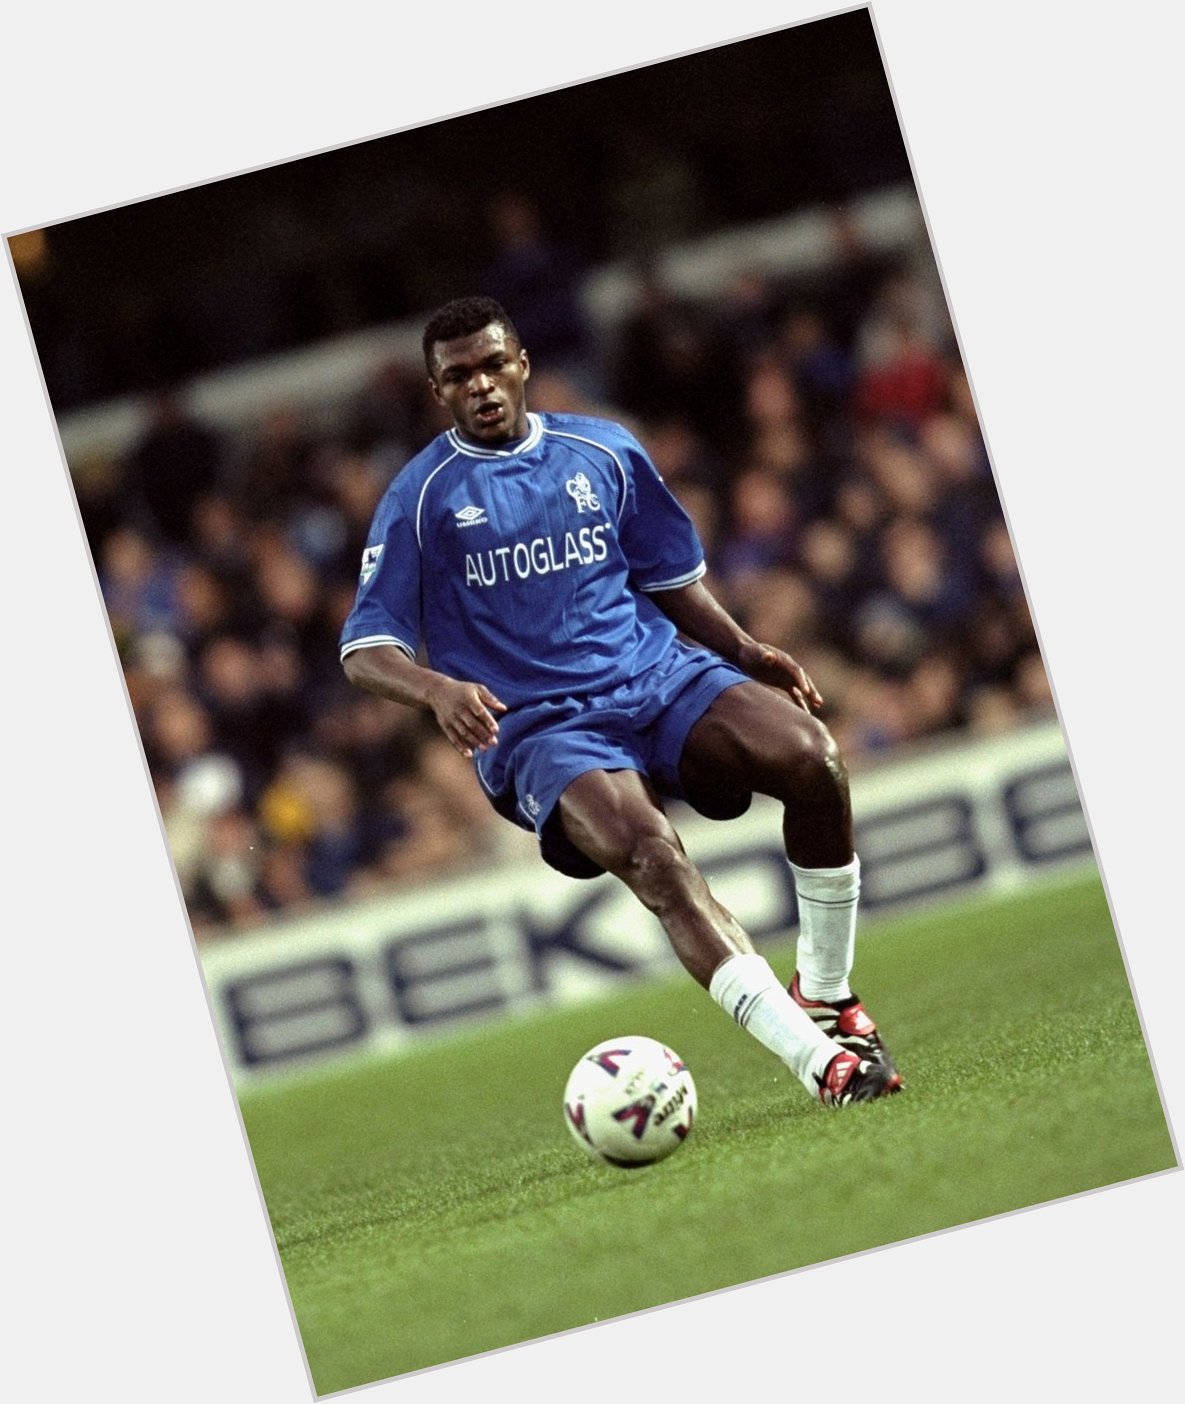 A formidable Frenchman  Happy birthday to  winner, Marcel Desailly! 